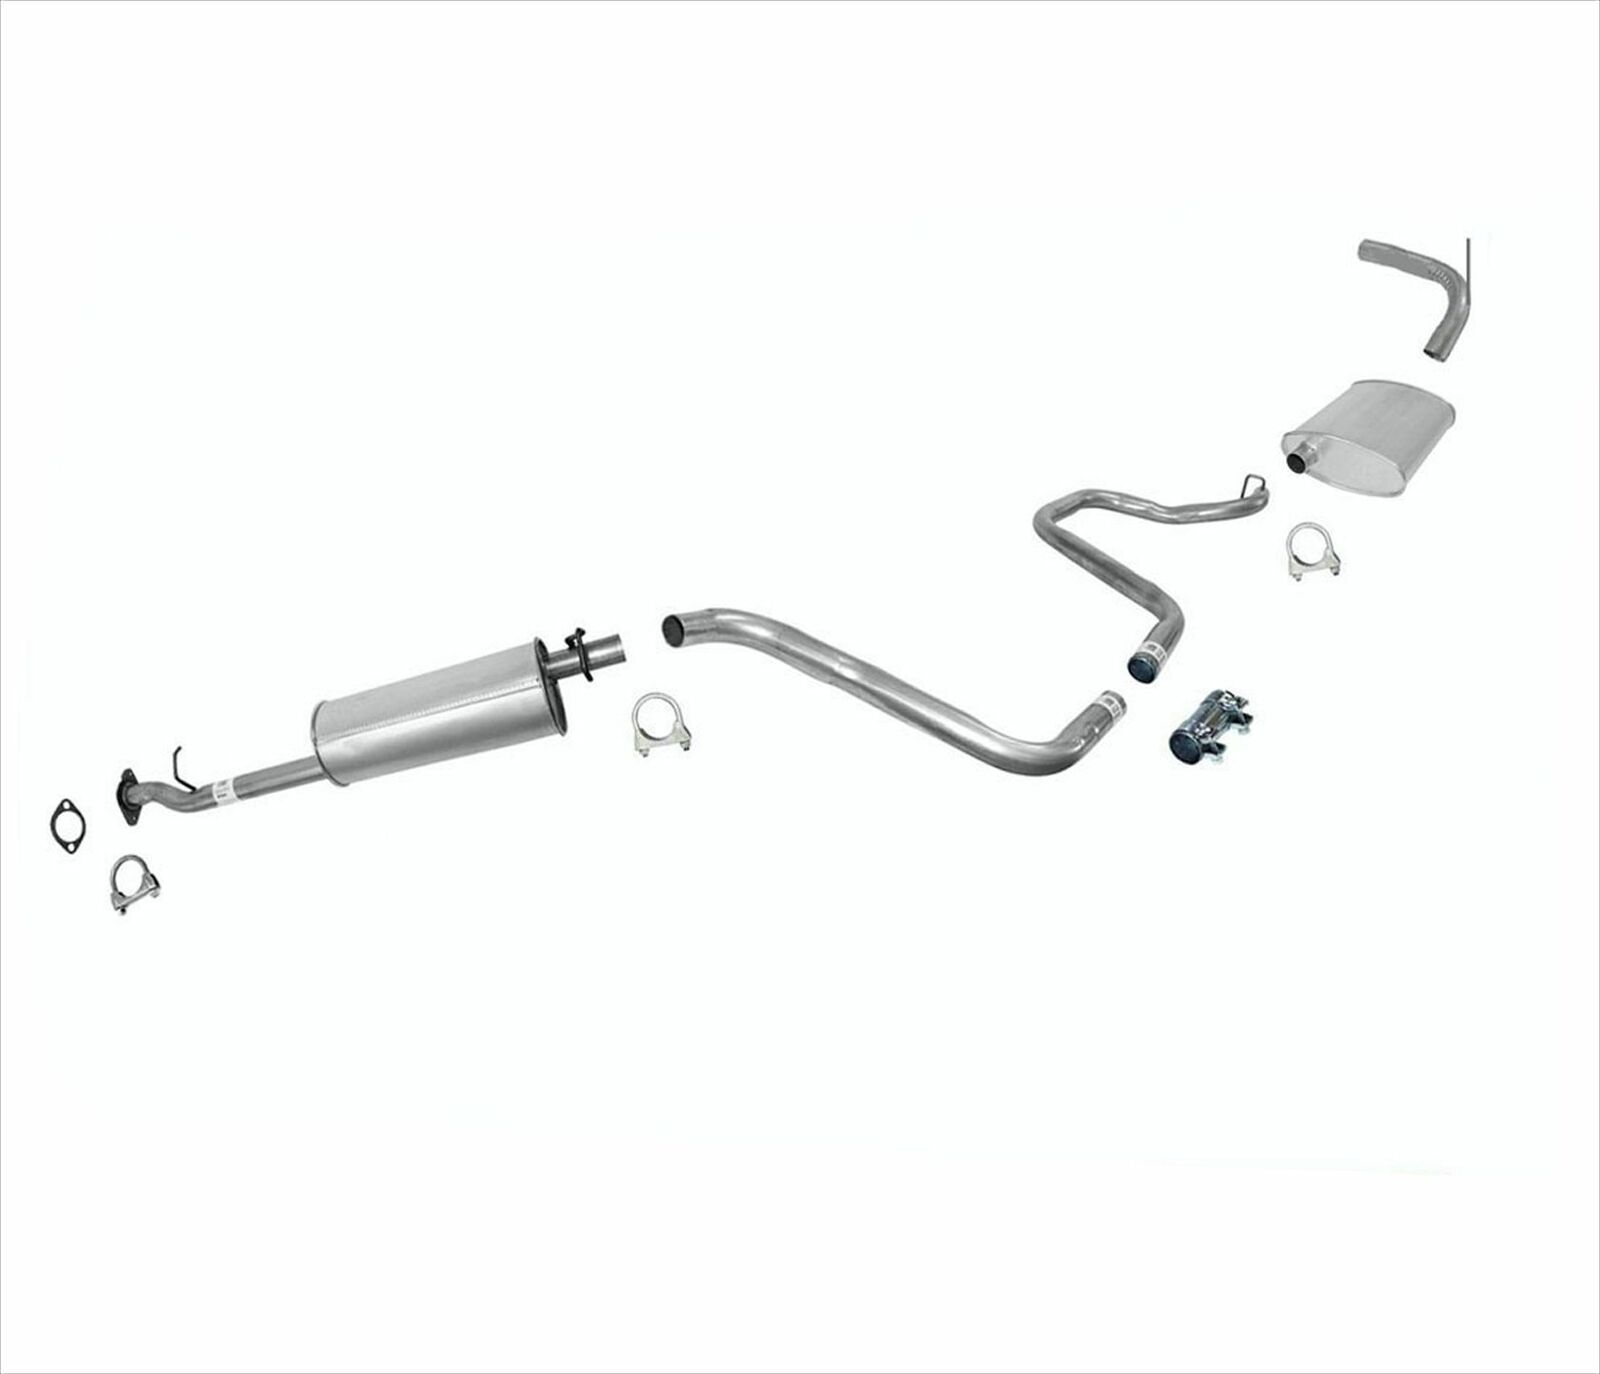 Muffler Exhaust System for Chevrolet Base Malibu 3.5L 04-06 / Will Not Fit MAXX